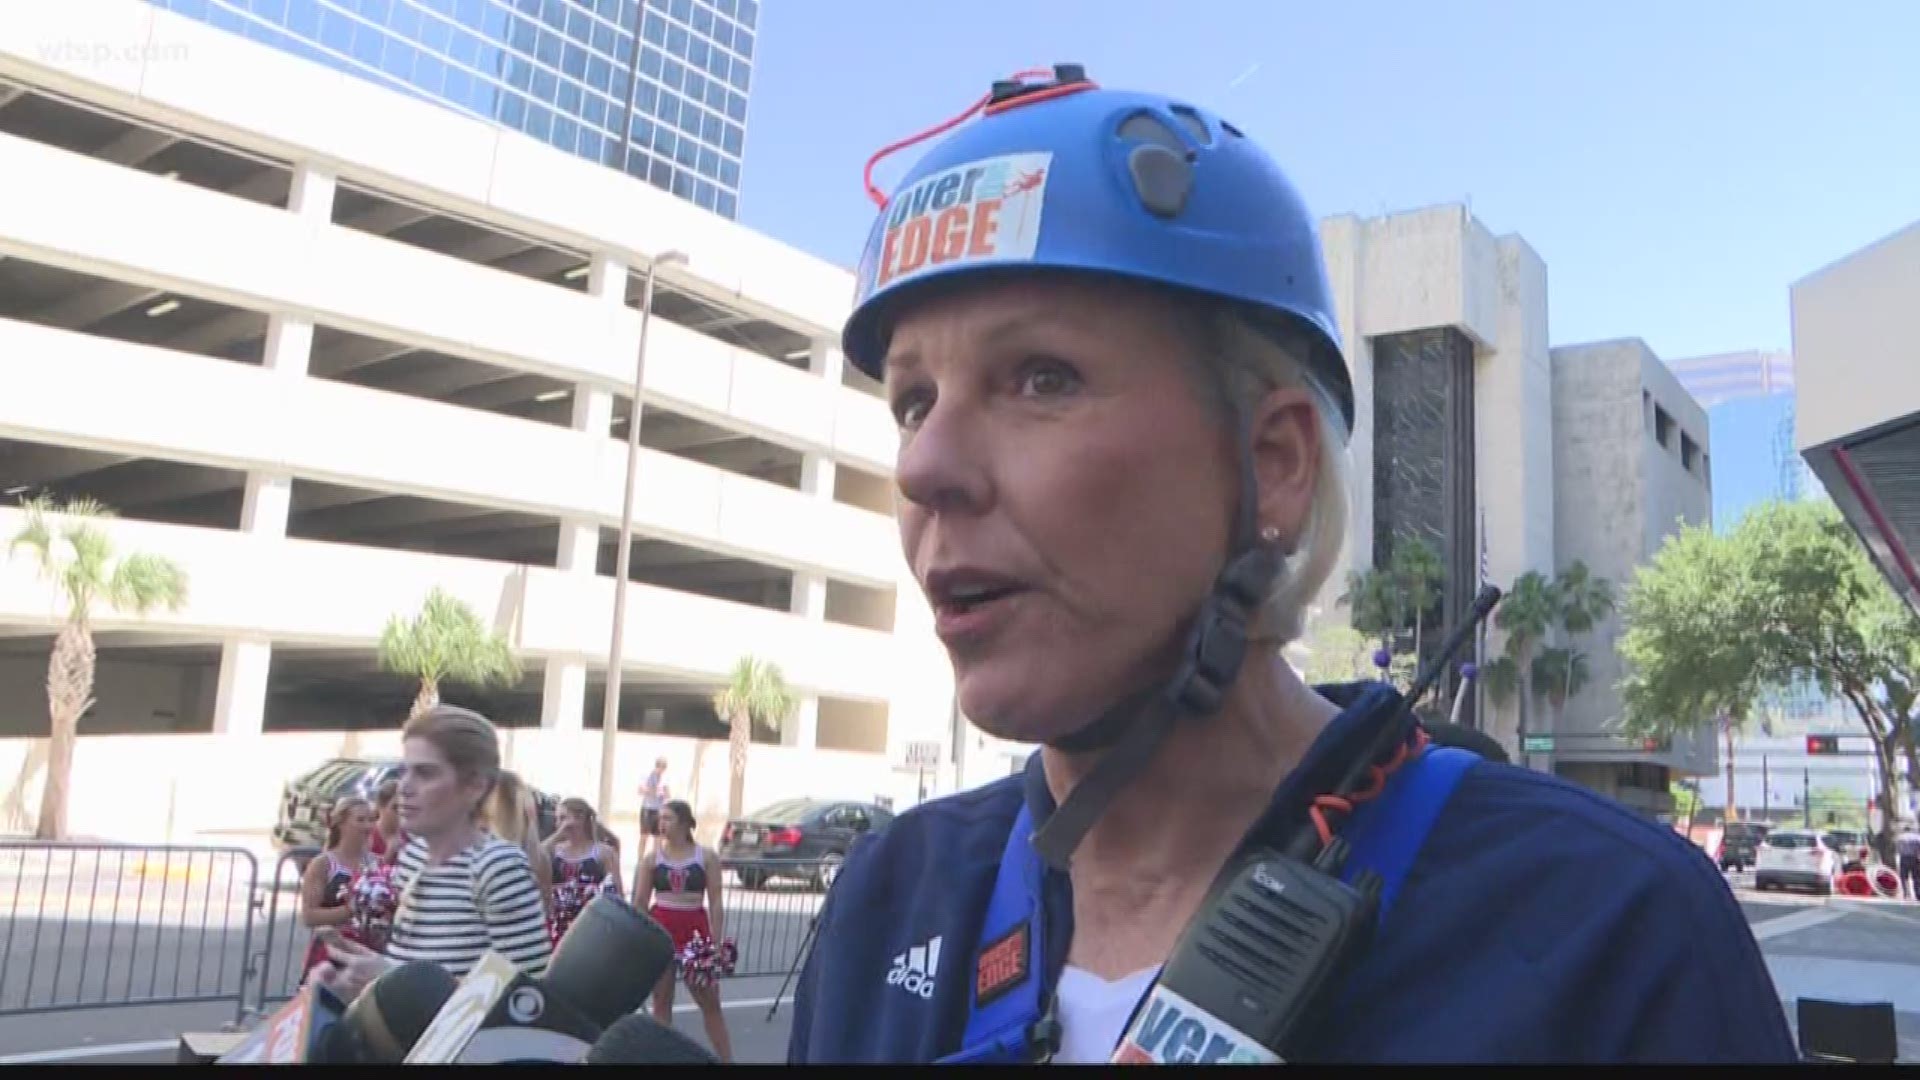 Mayor-elect Jane Castor is not afraid of heights. At least, she didn't seem afraid as she jetted down the side of the Hilton in downtown Tampa Saturday. 

The former police chief joined current police chief Brian Dugan and about 40 others for the fifth annual, “Over The Edge" event. The hours-long party raises money for Big Brothers Big Sisters, a mentorship program for young children in the area.